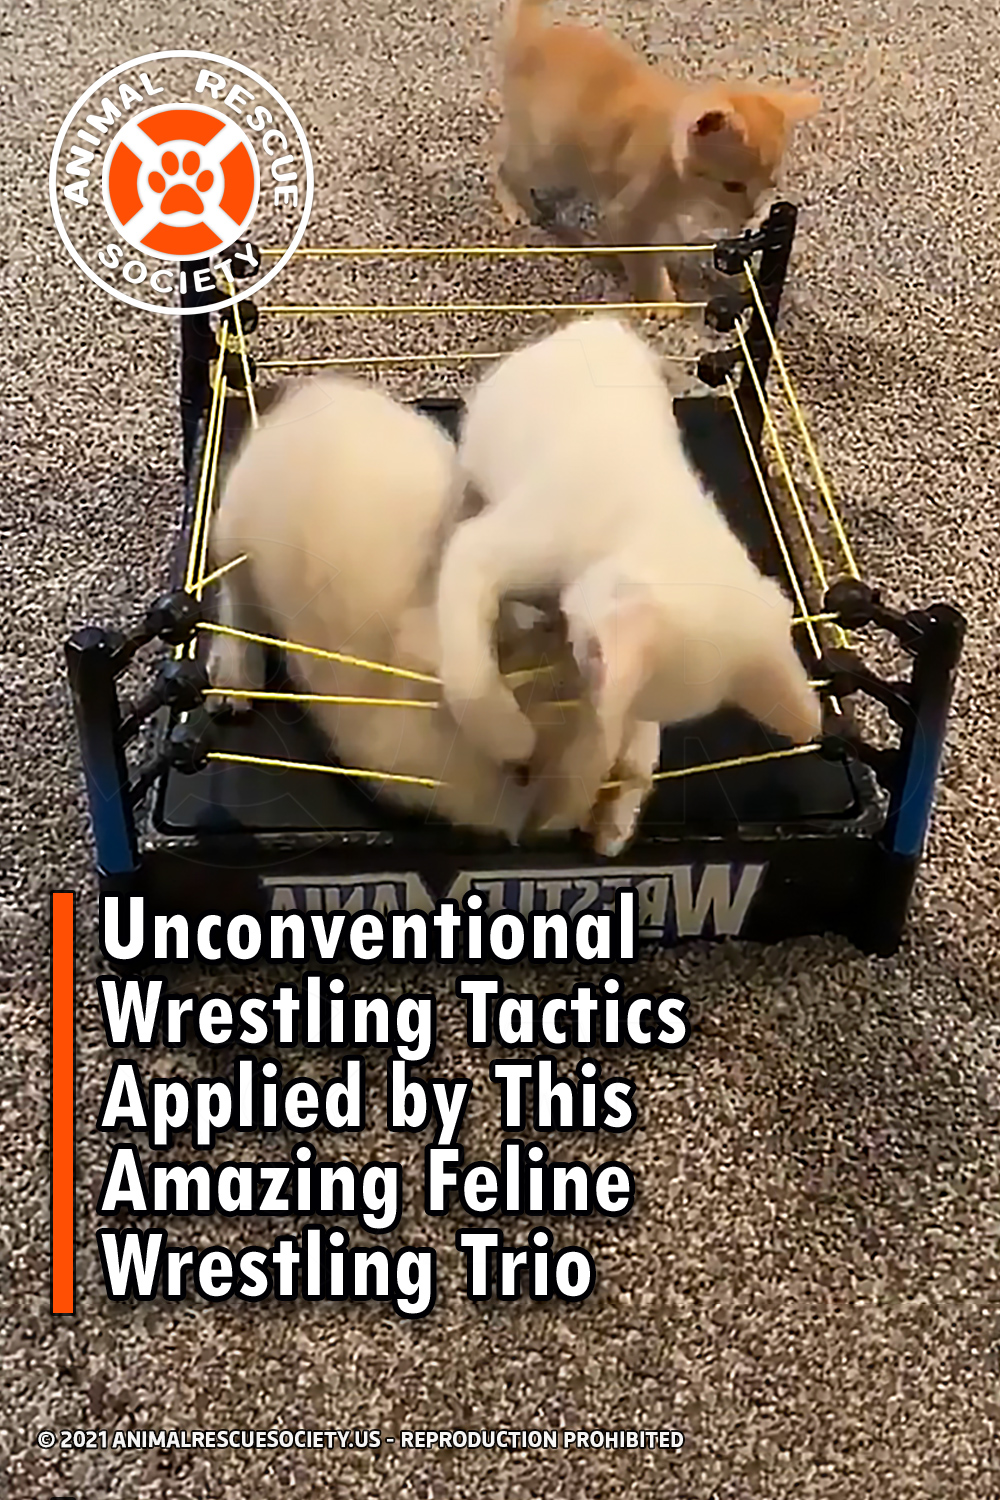 Unconventional Wrestling Tactics Applied by This Amazing Feline Wrestling Trio